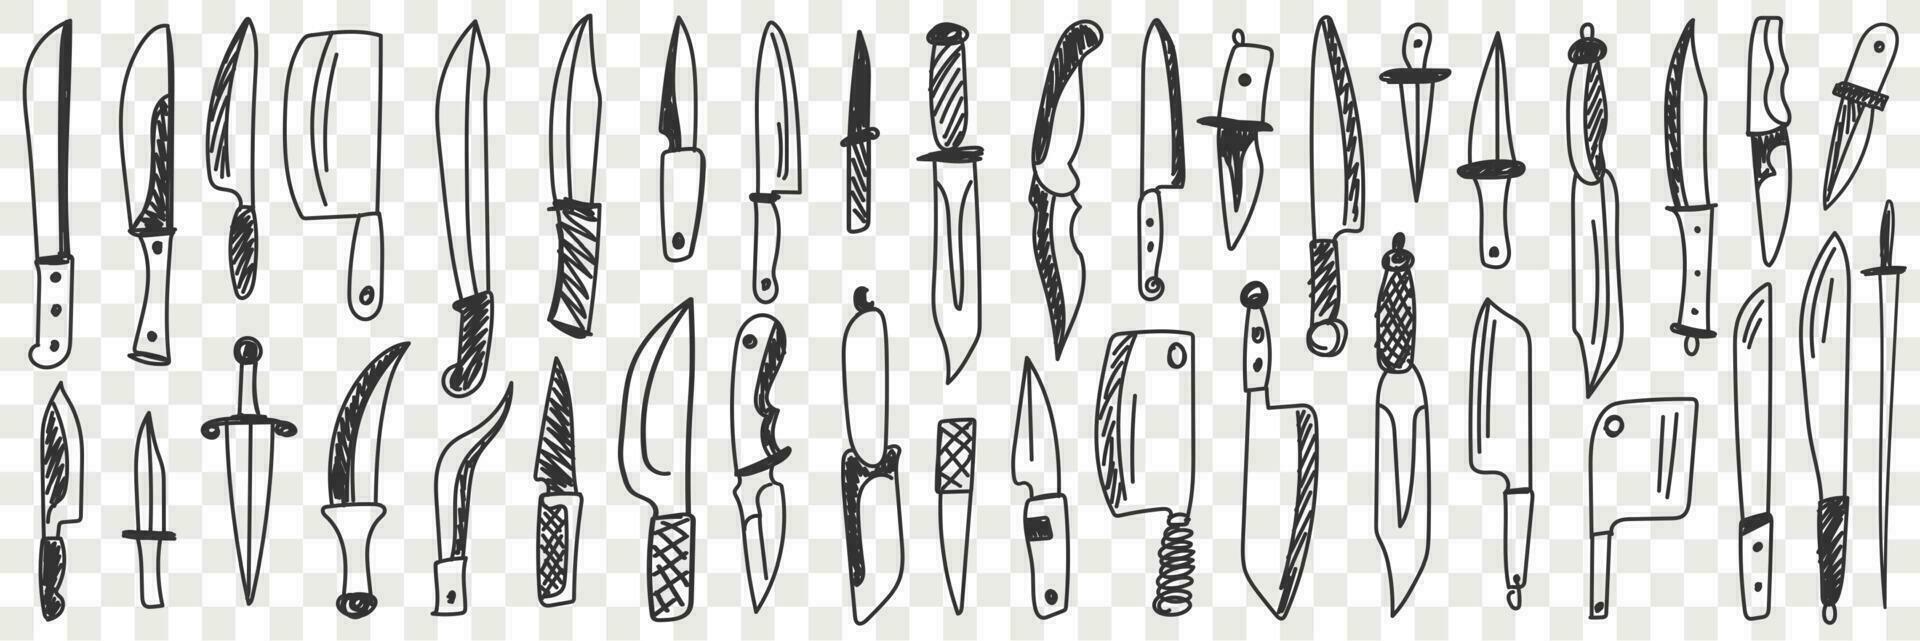 Knives for cutting doodle set. Collection of hand drawn various table and kitchen knife for cooking and cutting isolated on transparent vector